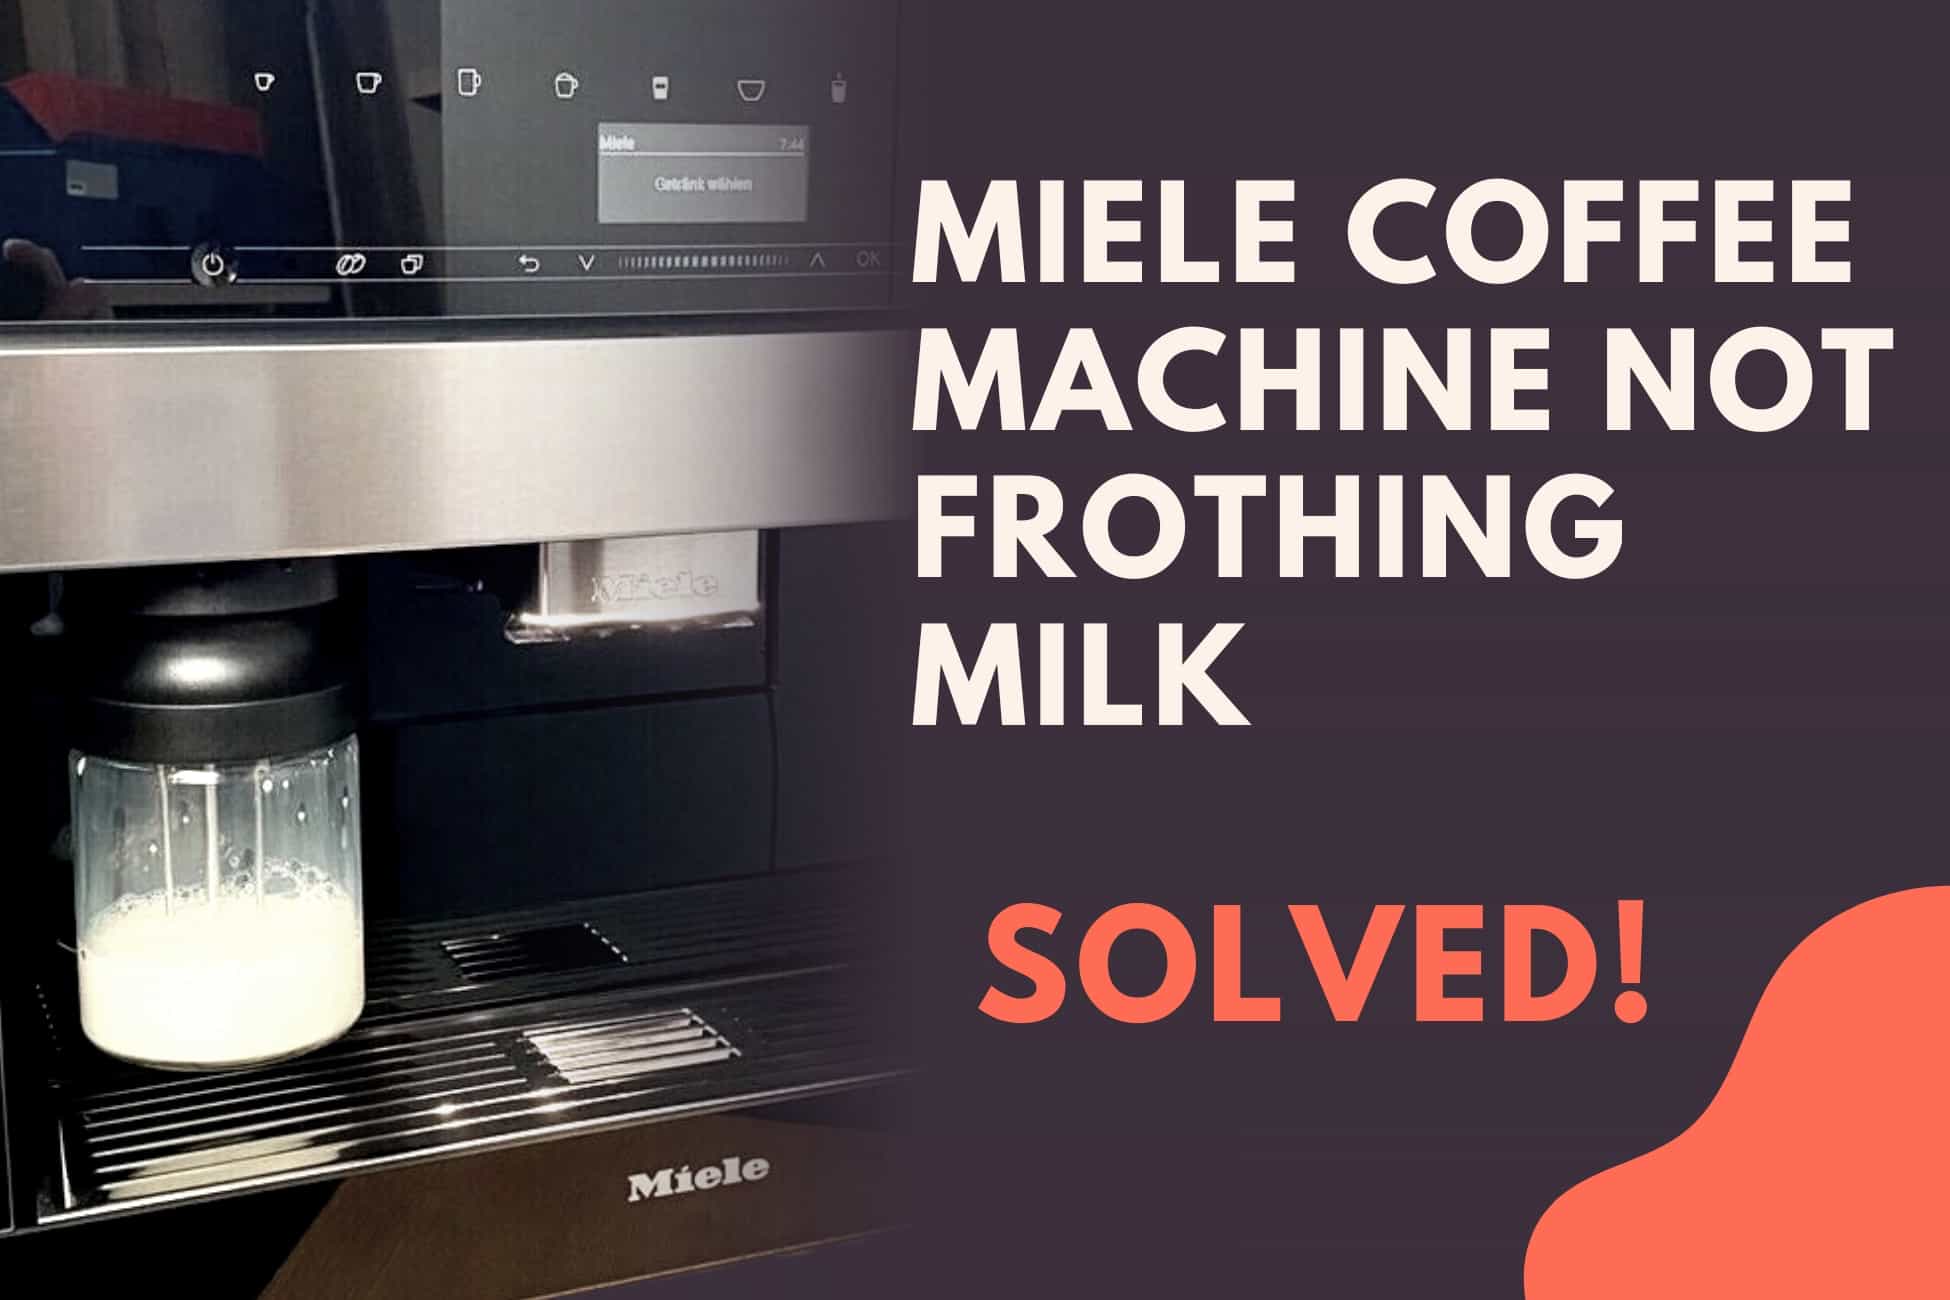 Miele Coffee Machine Not Frothing Milk